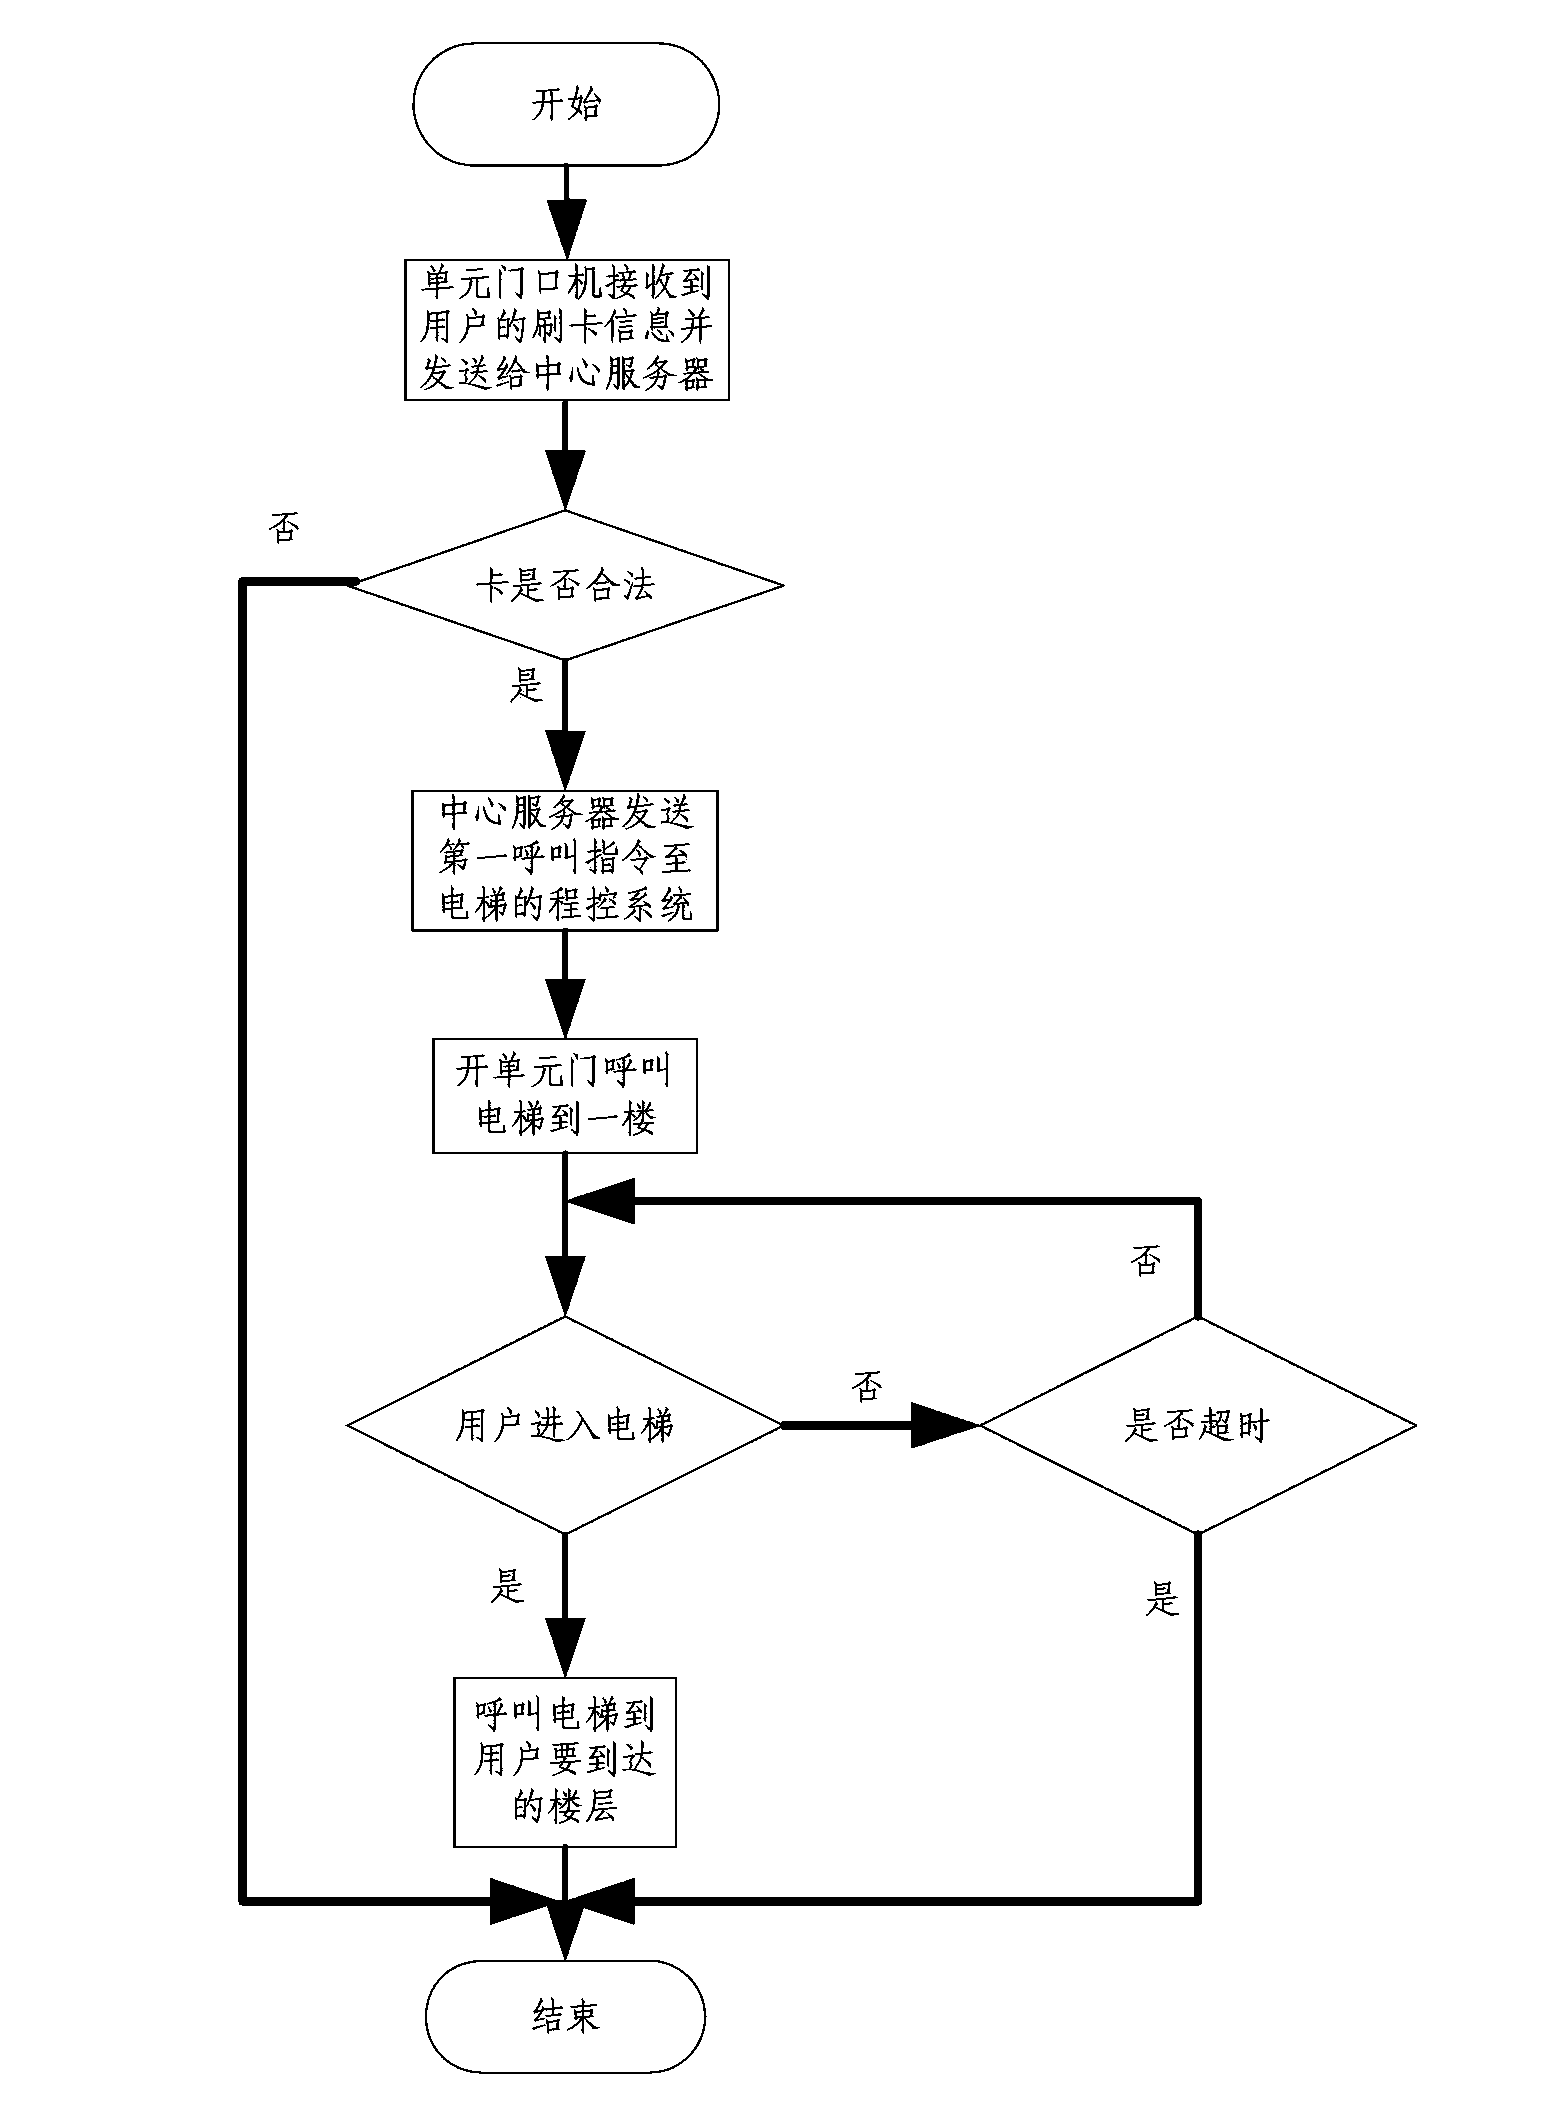 Elevator calling method and system